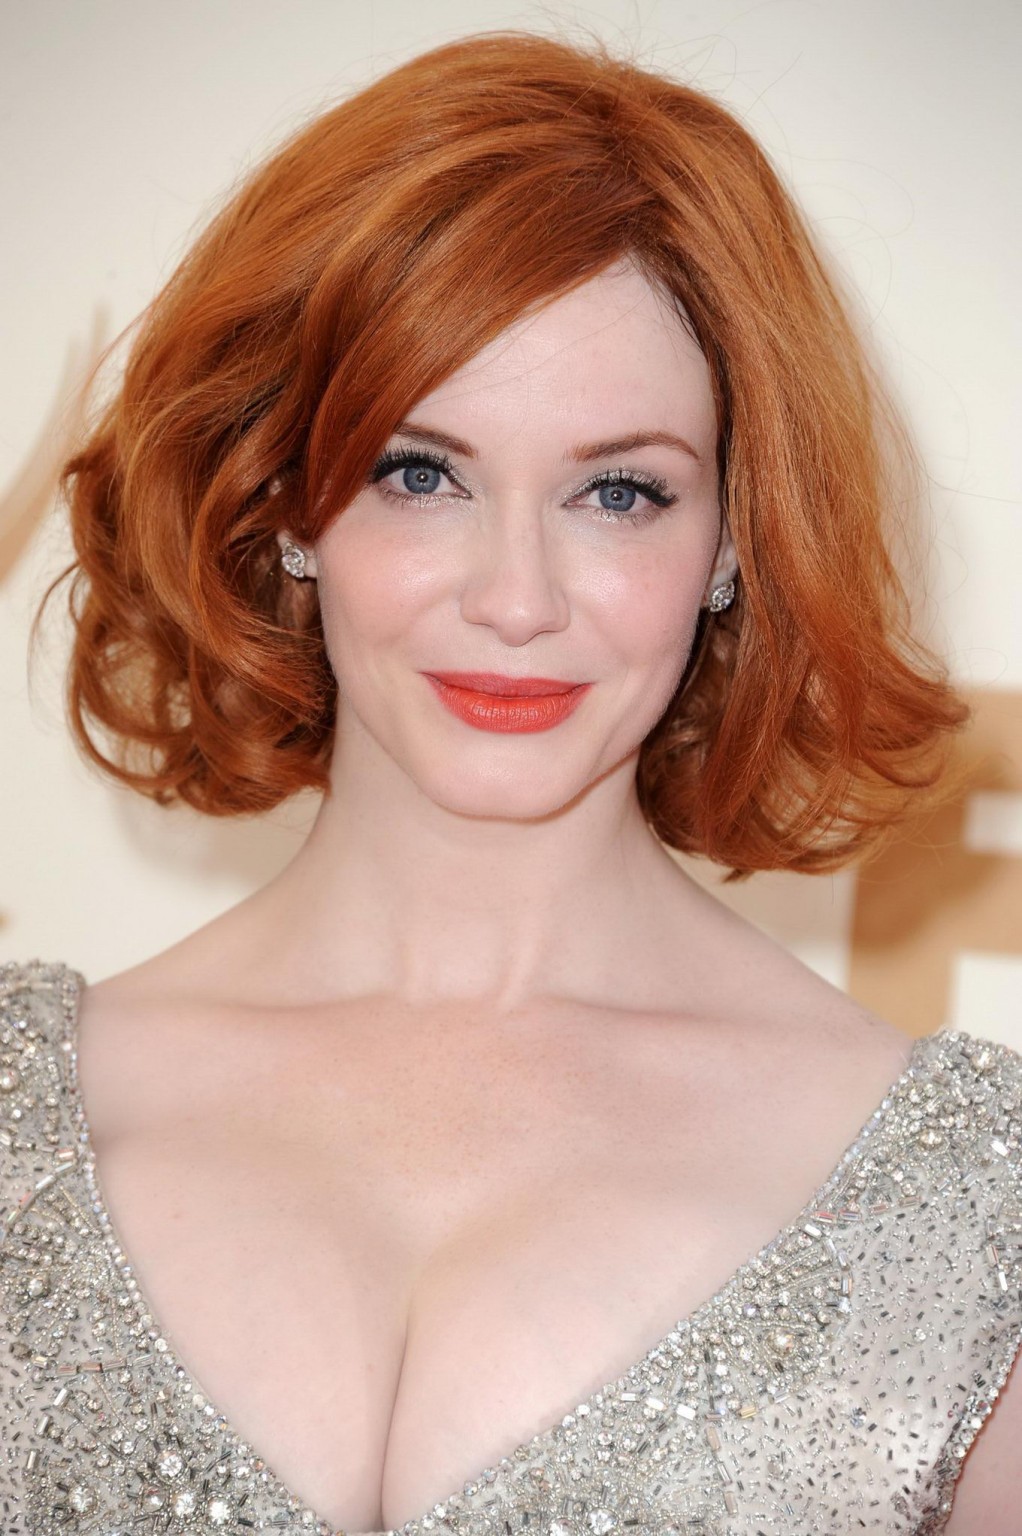 Christina Hendricks showing her enormous cleavage at 63rd Primetime Emmy Awards #75287836